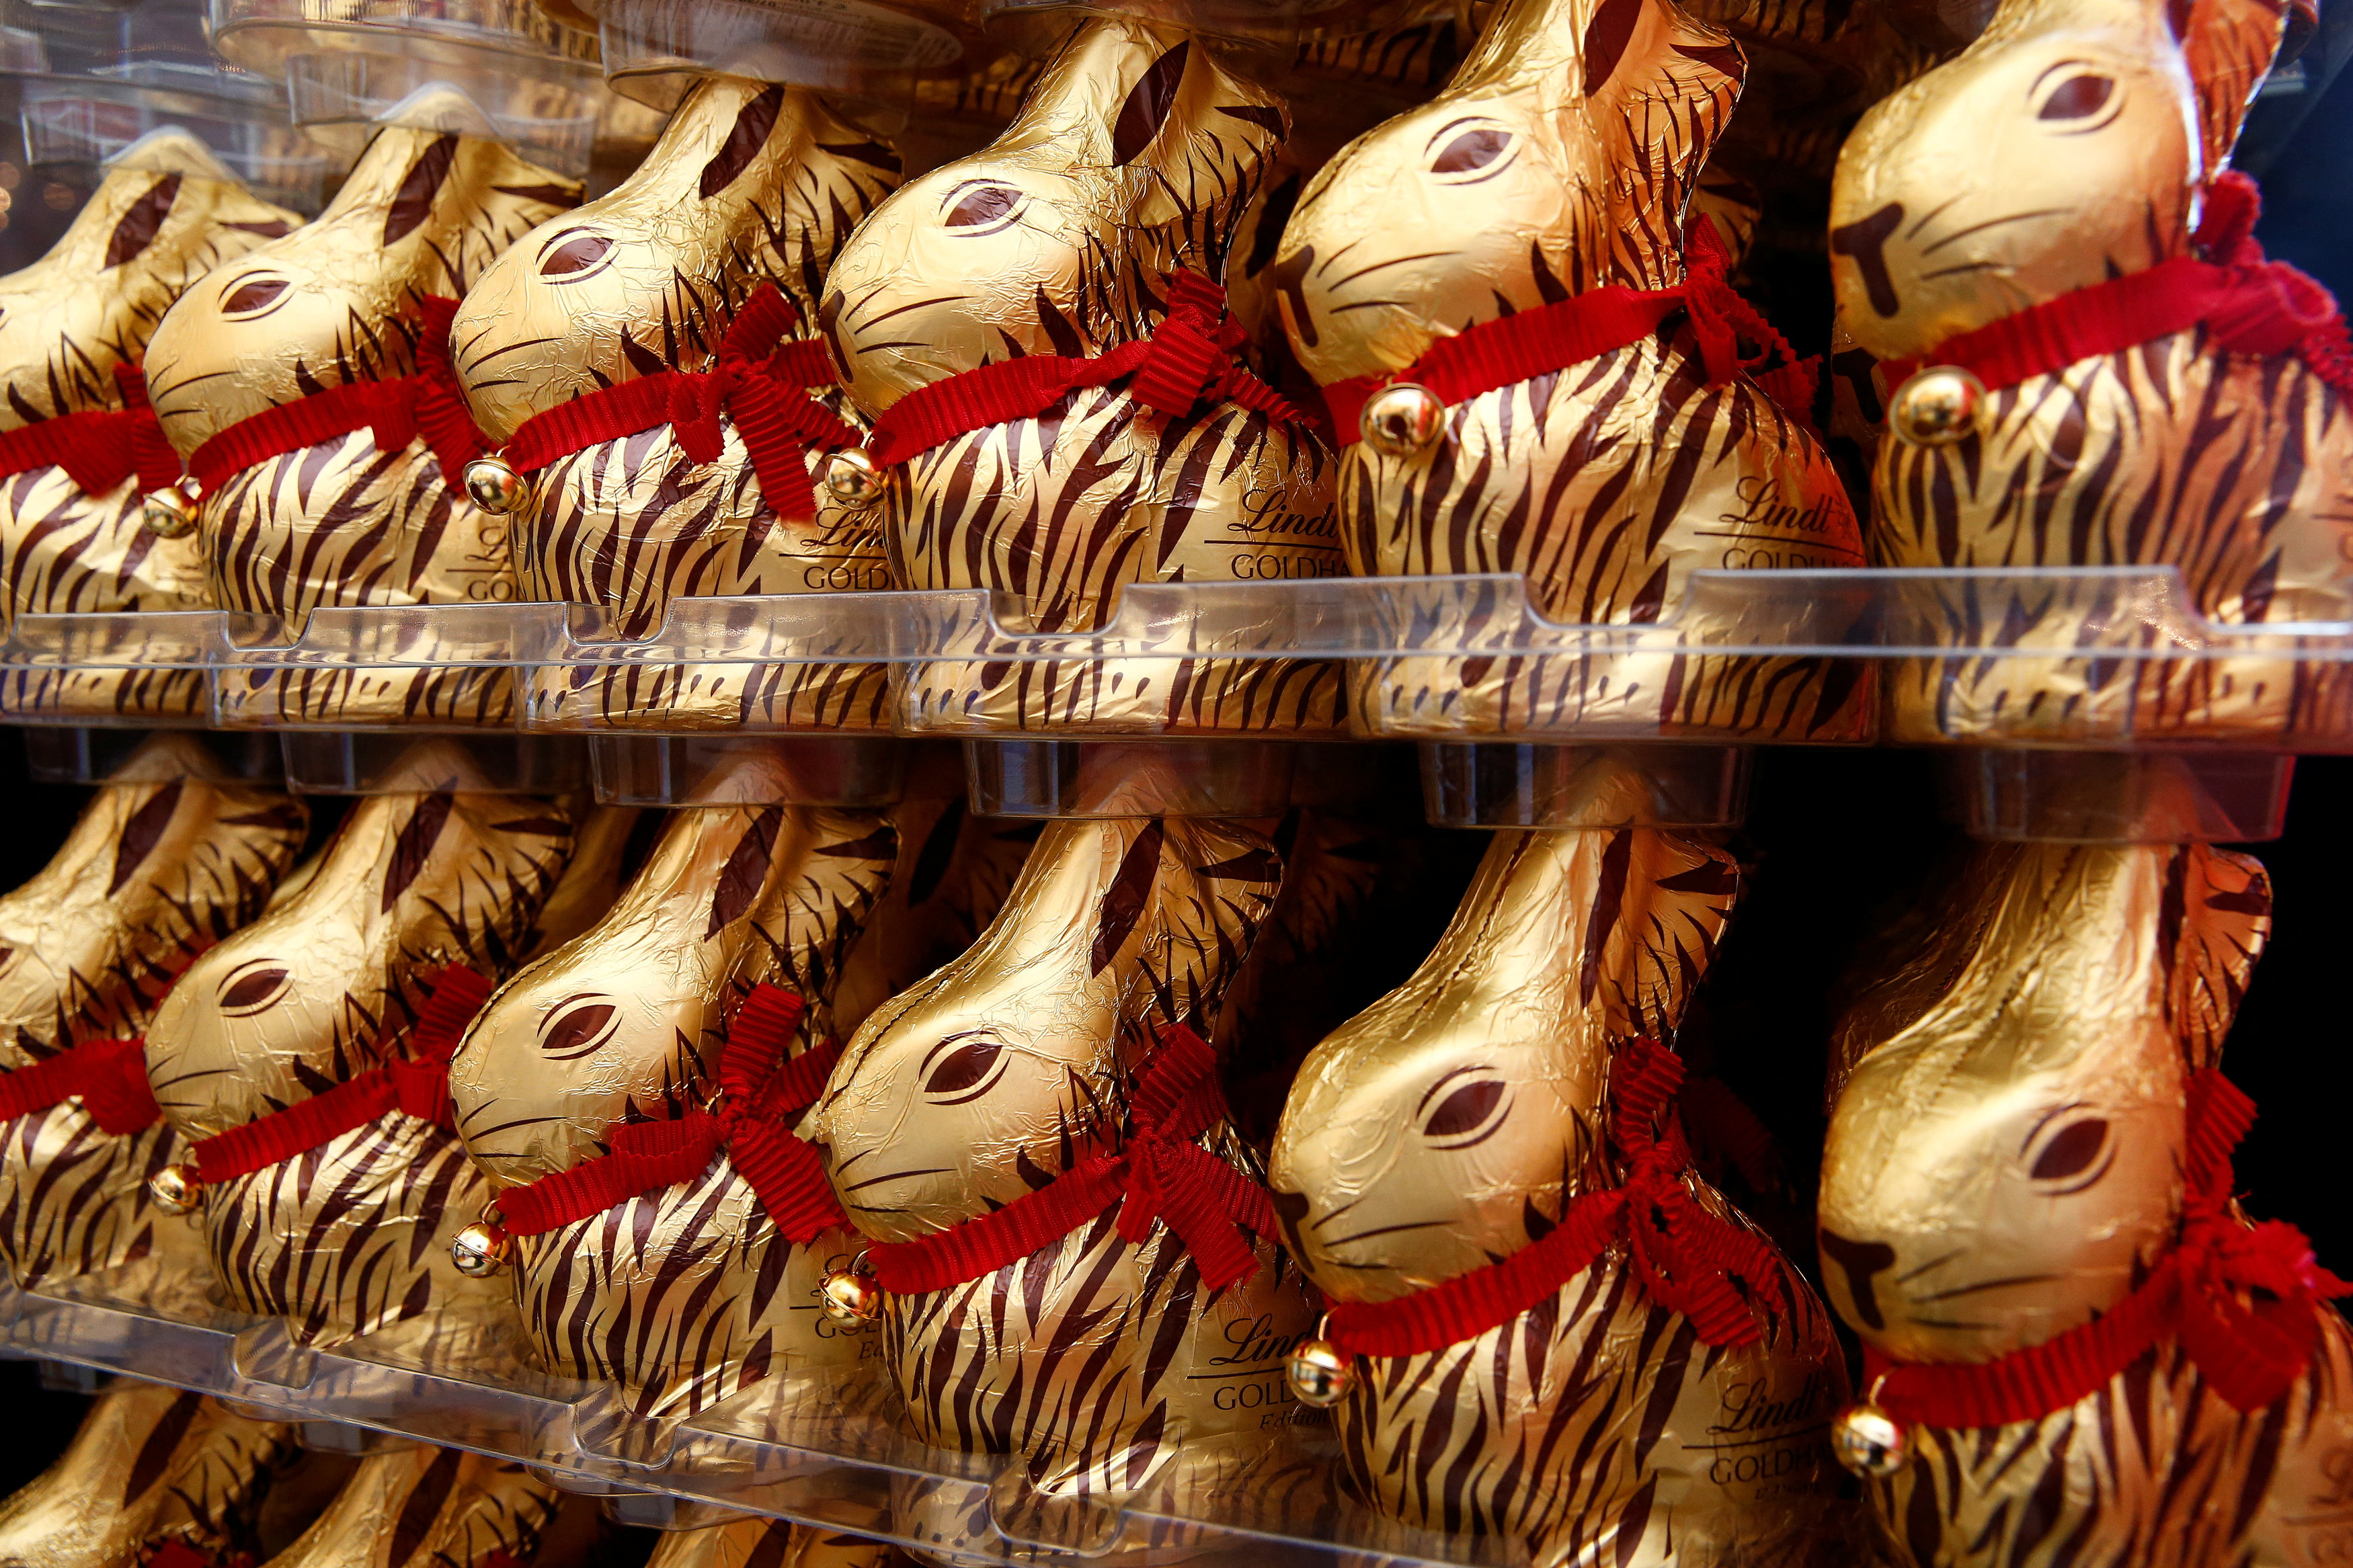 Gold-wrapped Easter chocolate bunnies are displayed during the annual news conference of Swiss chocolatier Lindt & Spruengli in Kilchberg